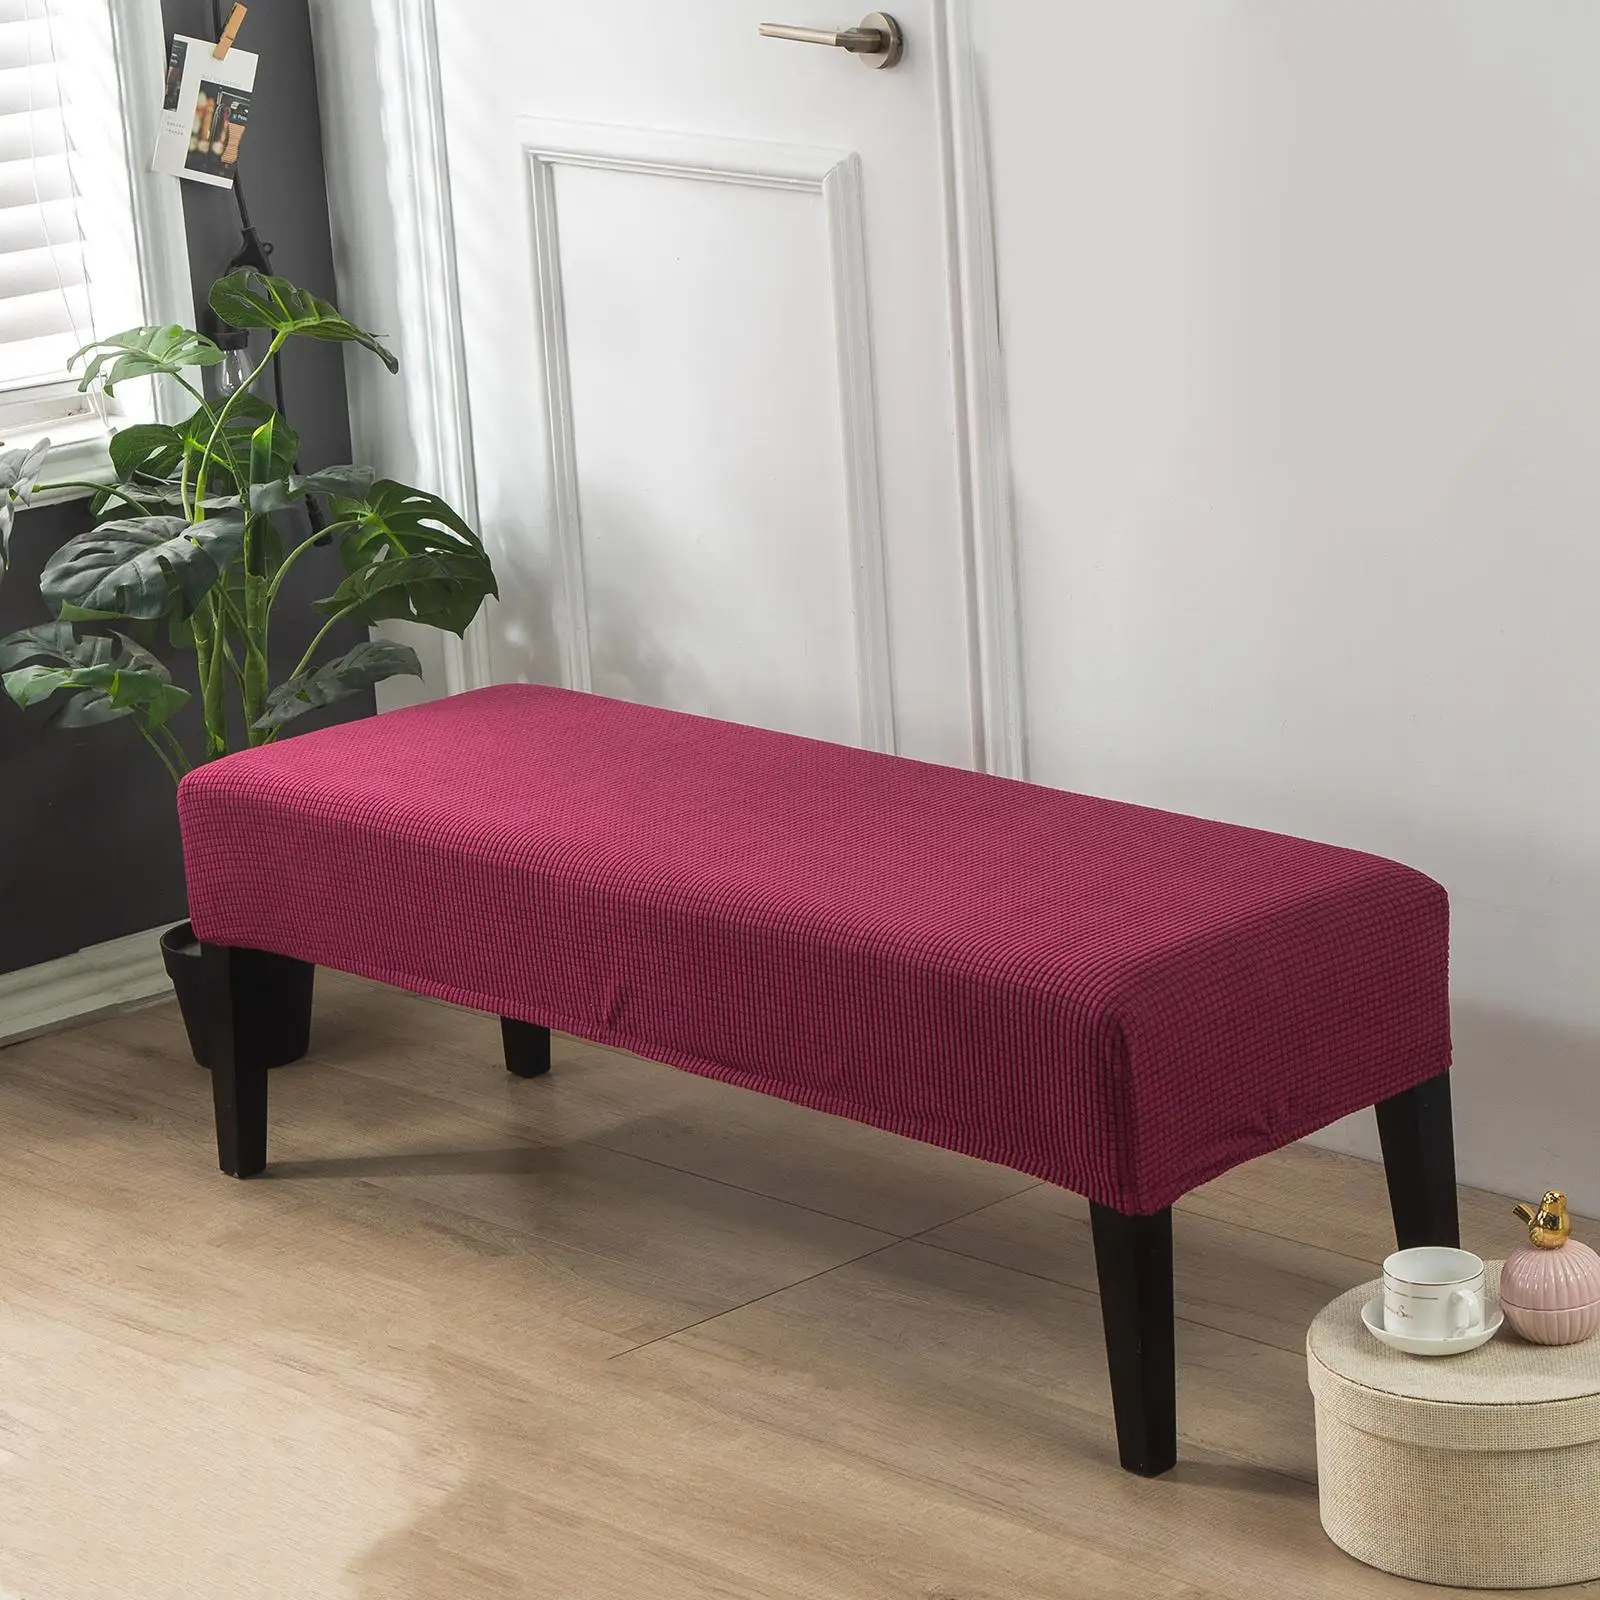 Polyester Jacquard Fabric Bench Cover Bench Slipcover Full Protection